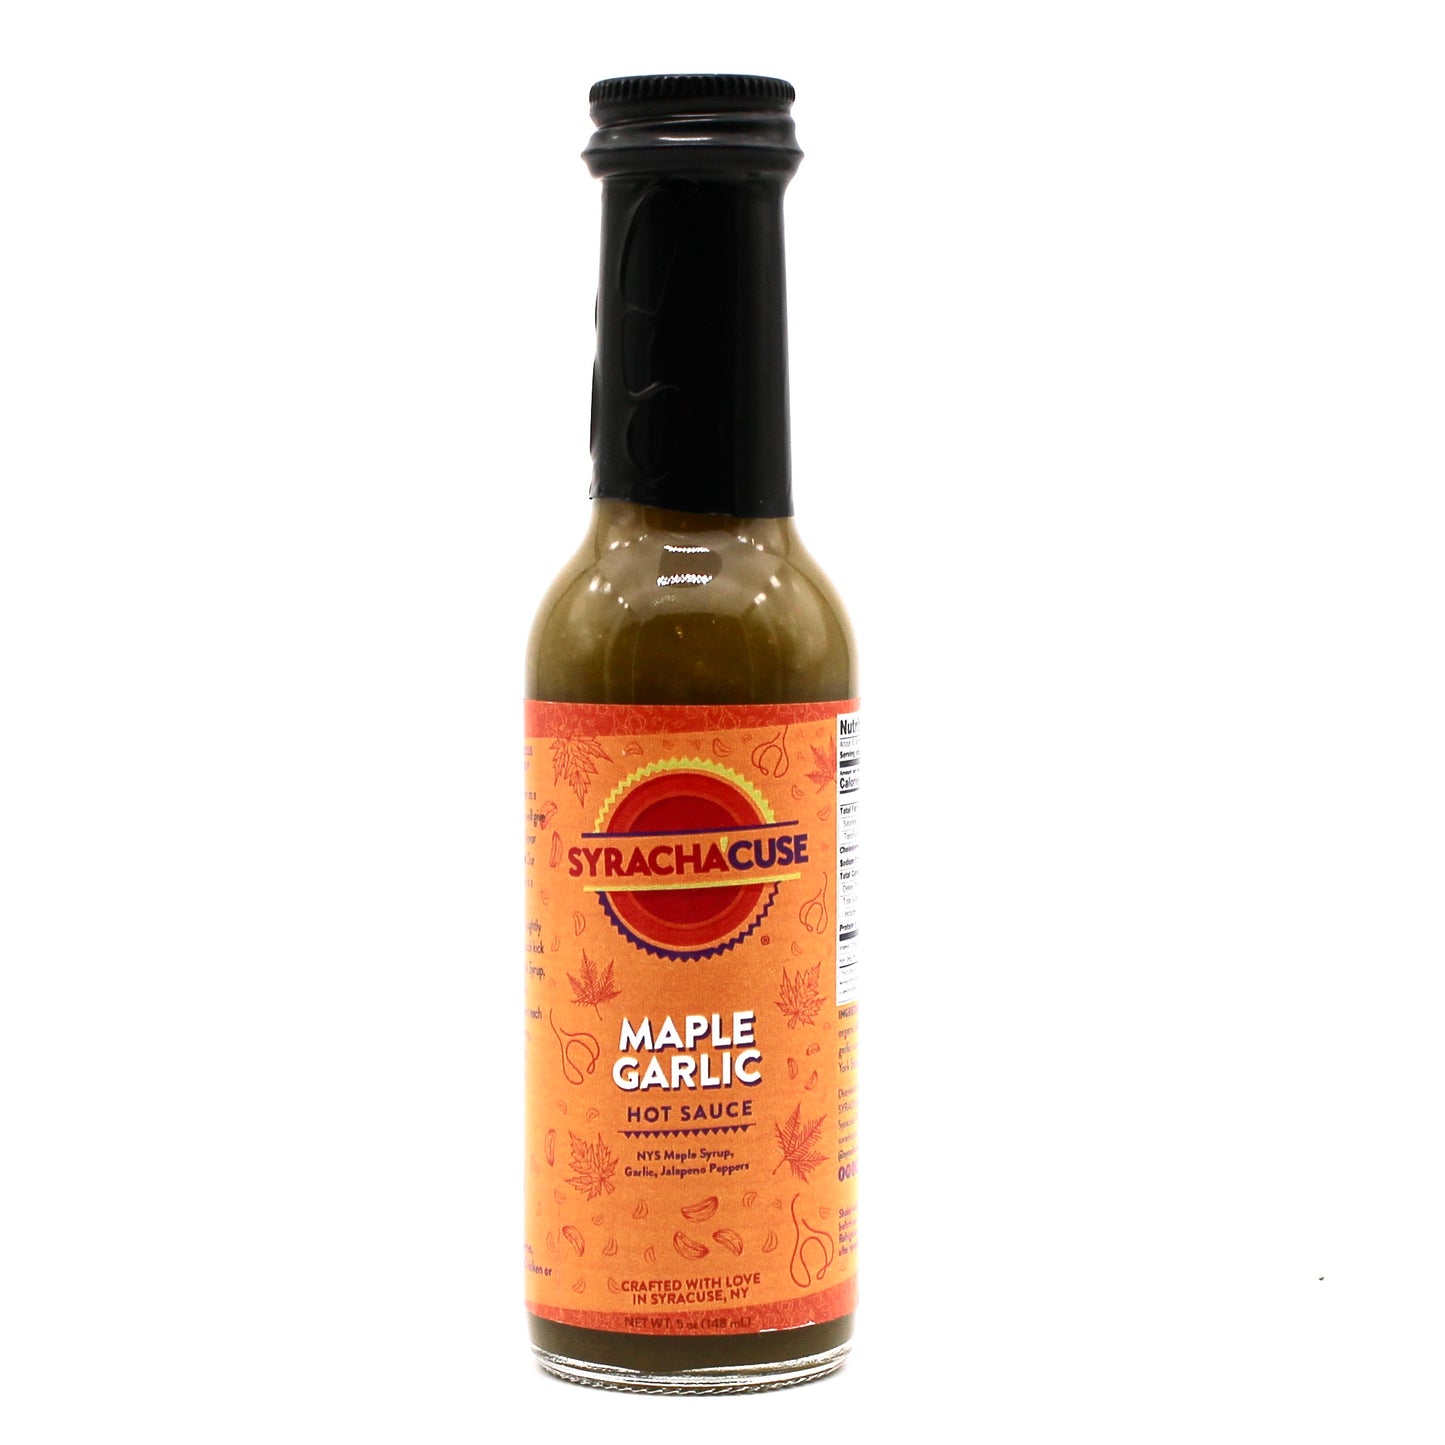 MAPLE GARLIC HOT SAUCE, Unique combination, extraordinary flavor, you’re going to love this sauce.